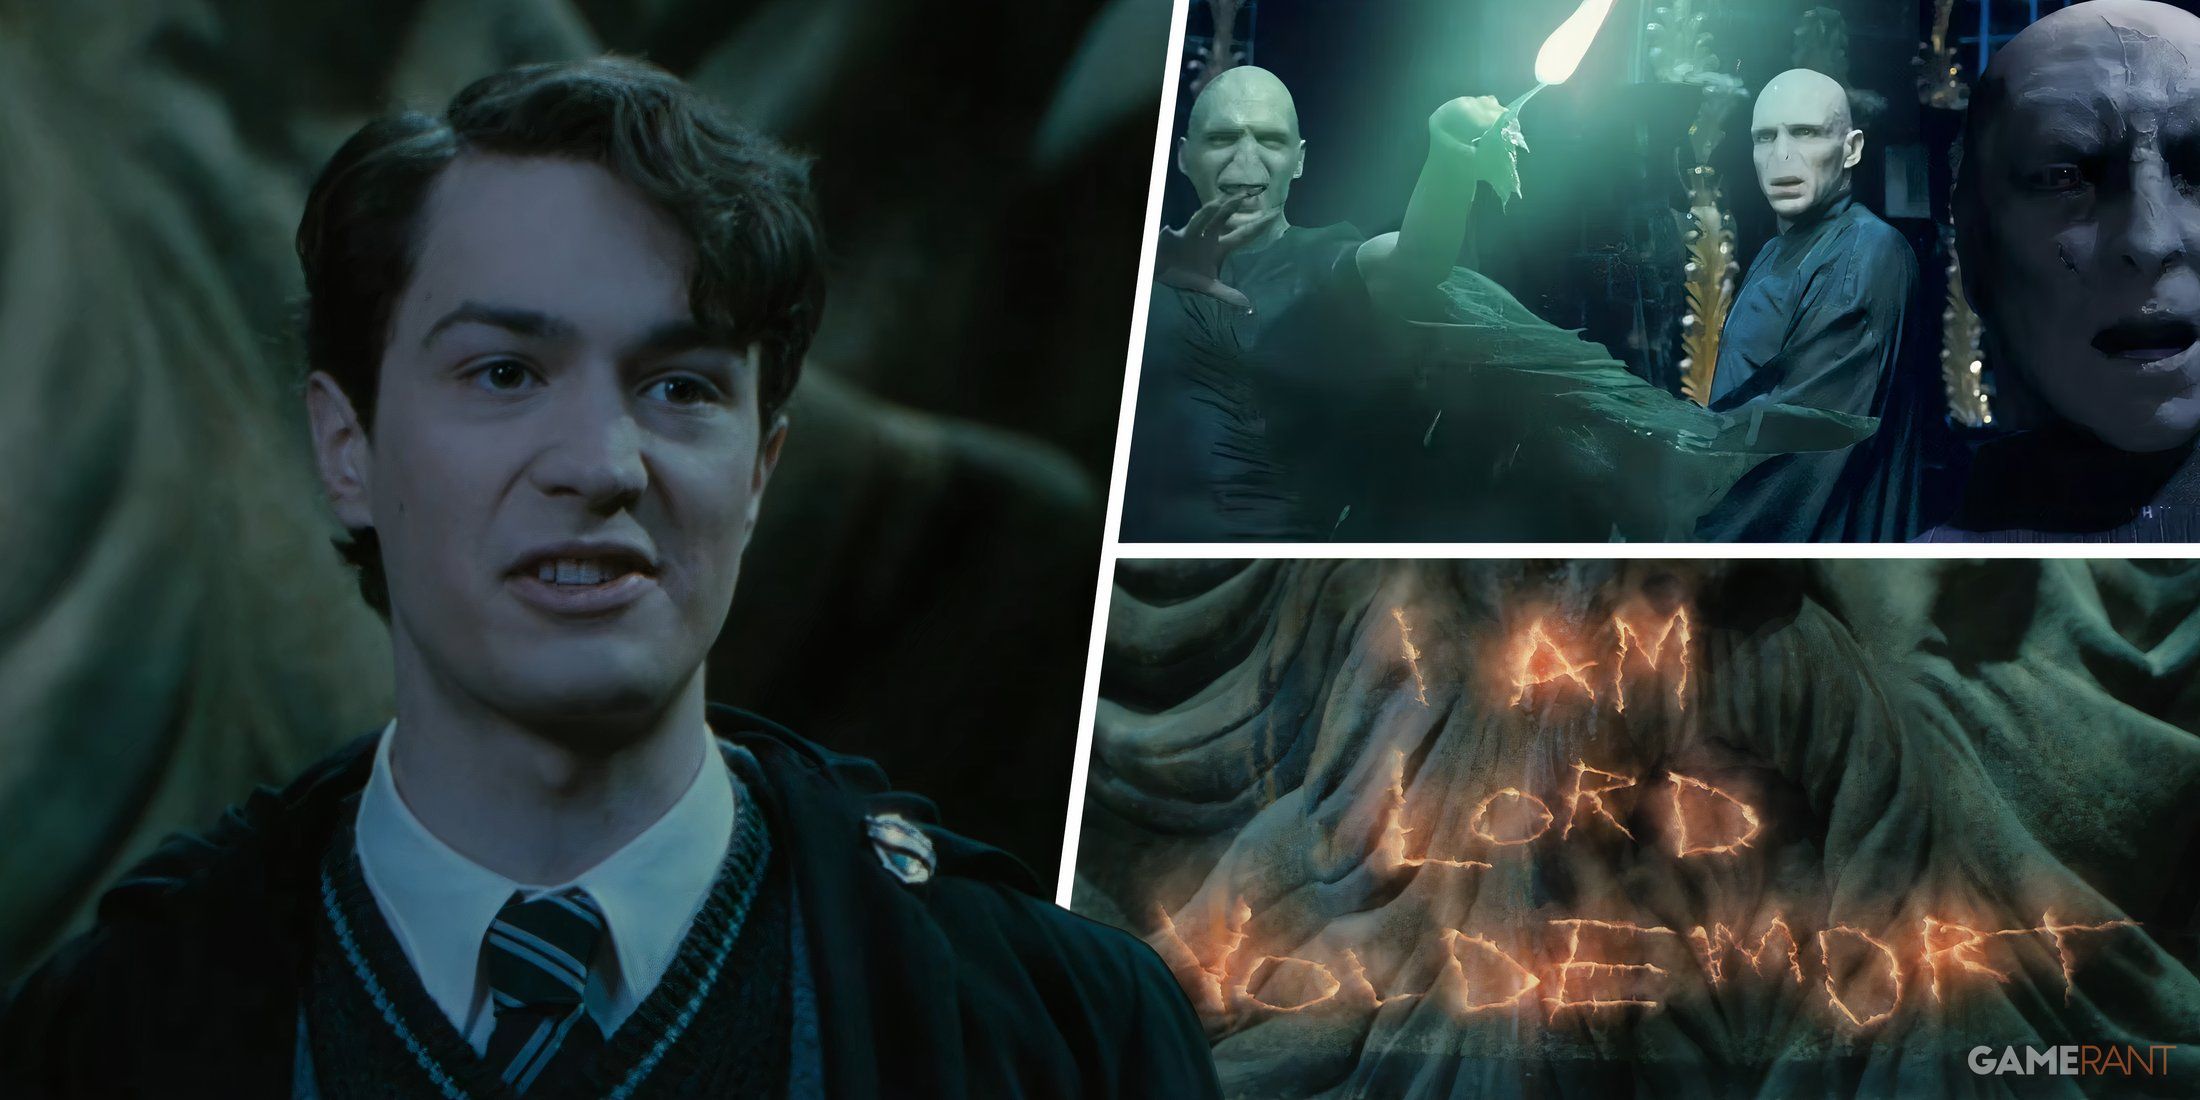 Tom Riddle / Lord Voldemort from the Harry Potter movies